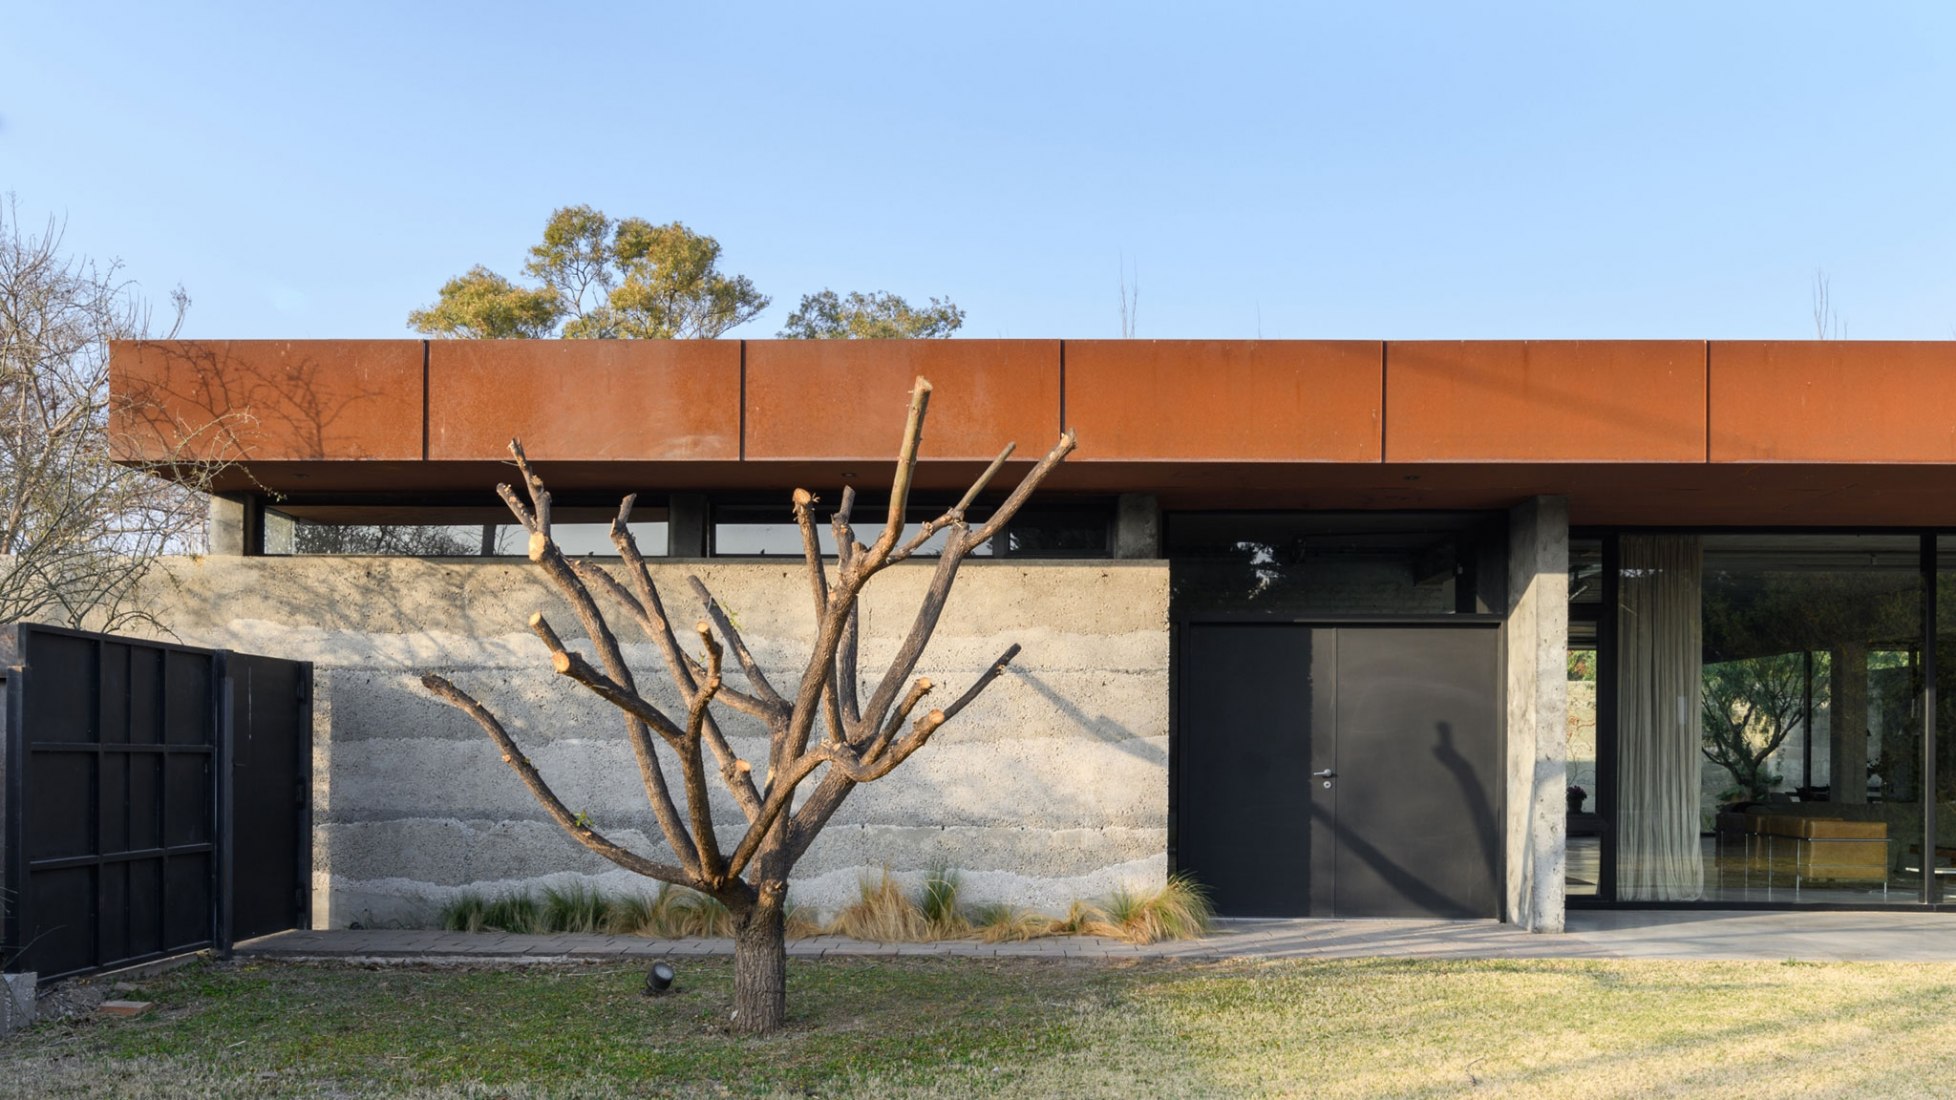 “Textural” house by Roberto Benito Arquitecto. Photograph by Gonzalo Viramonte.